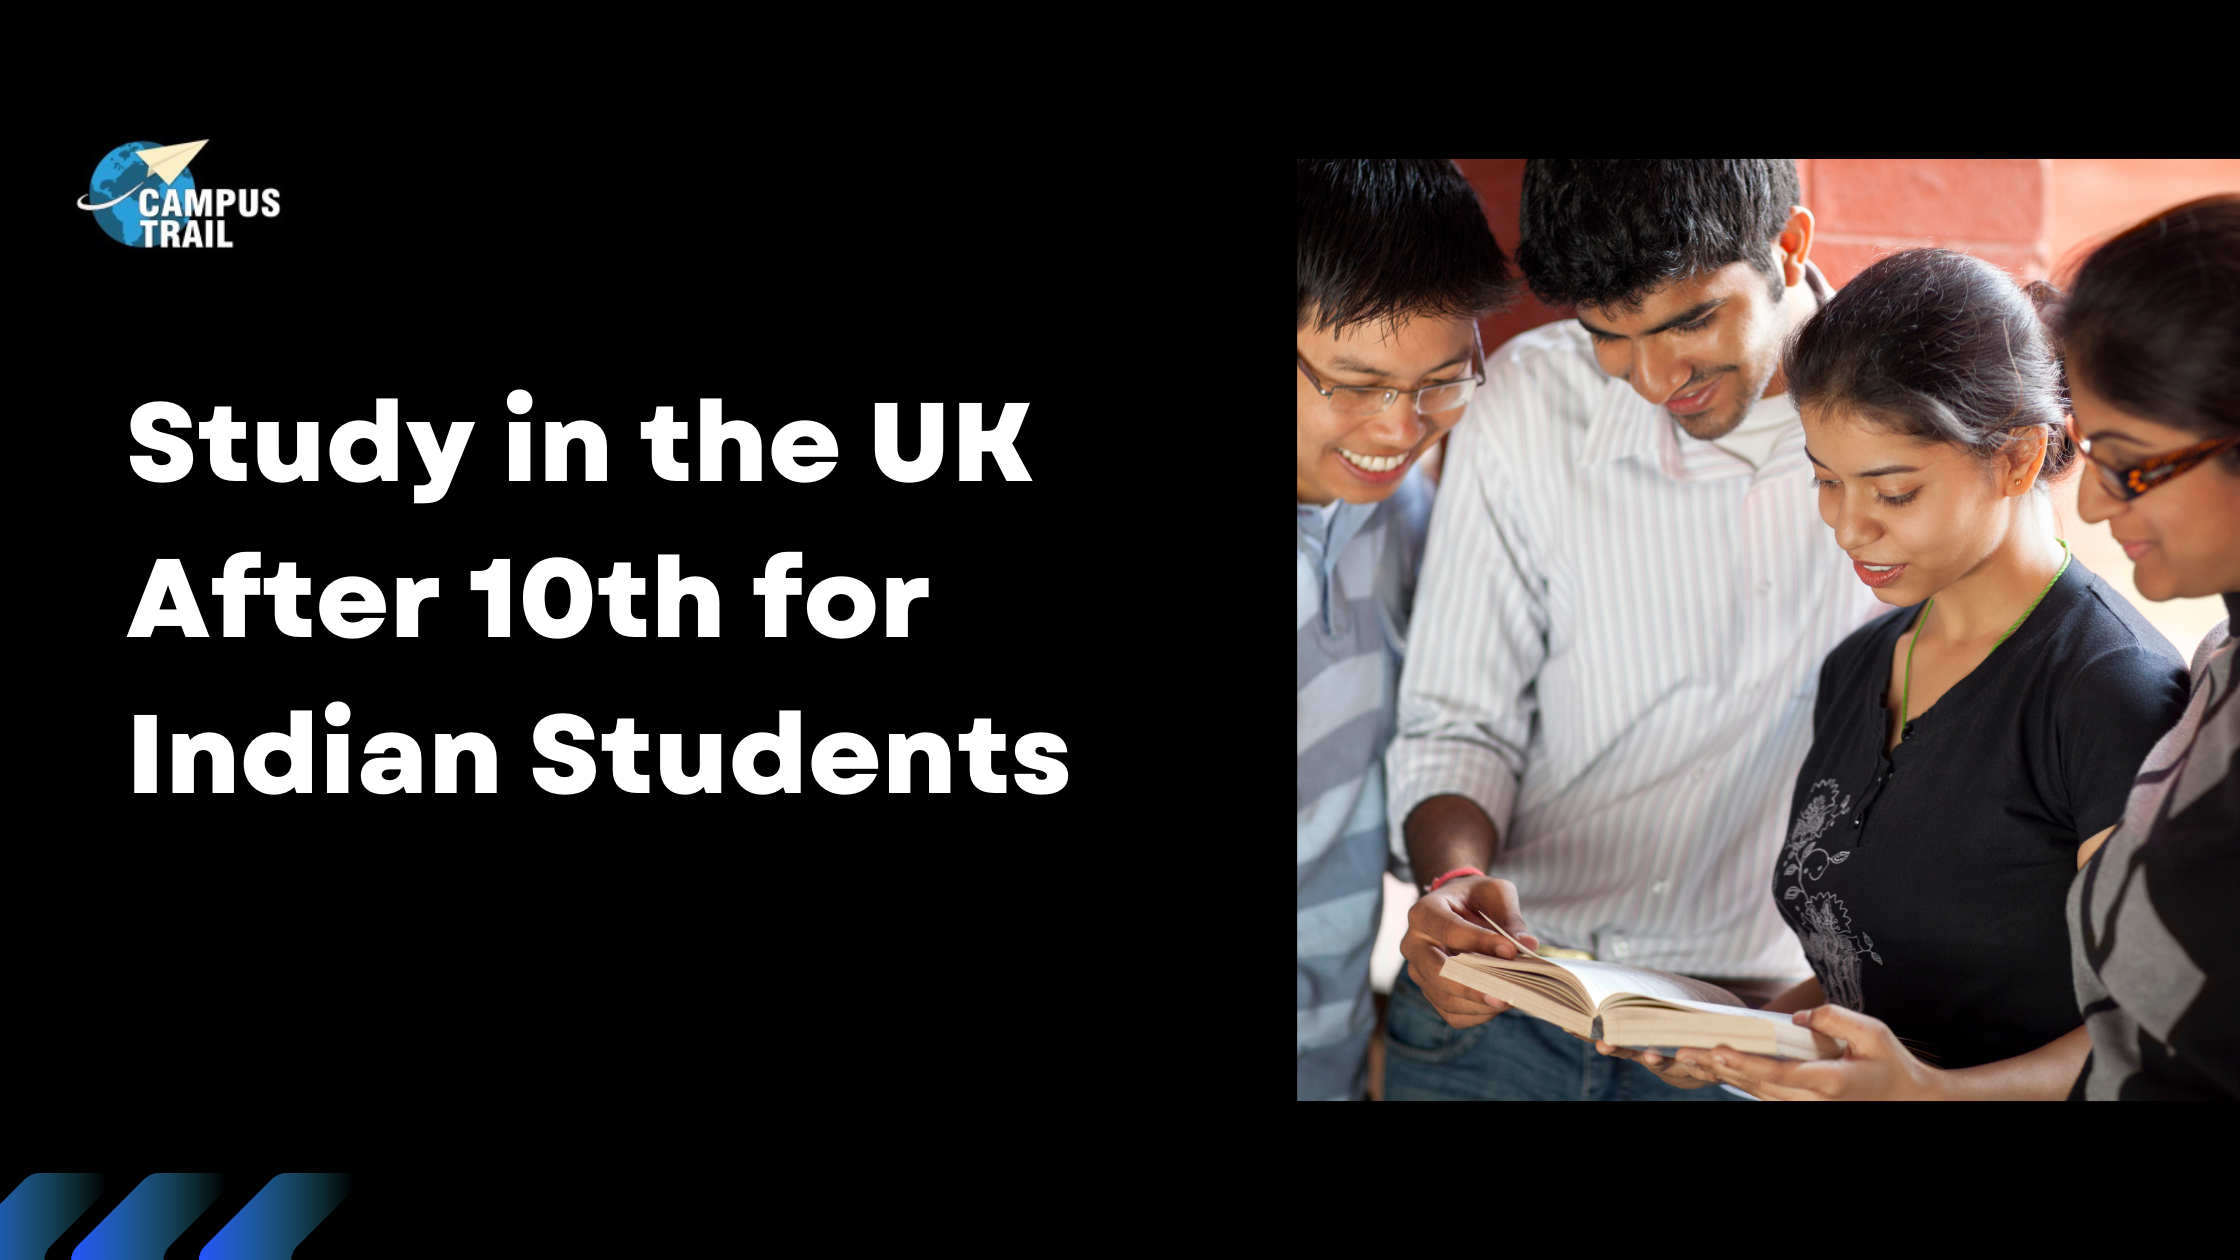 Study in the UK After 10th for Indian Students